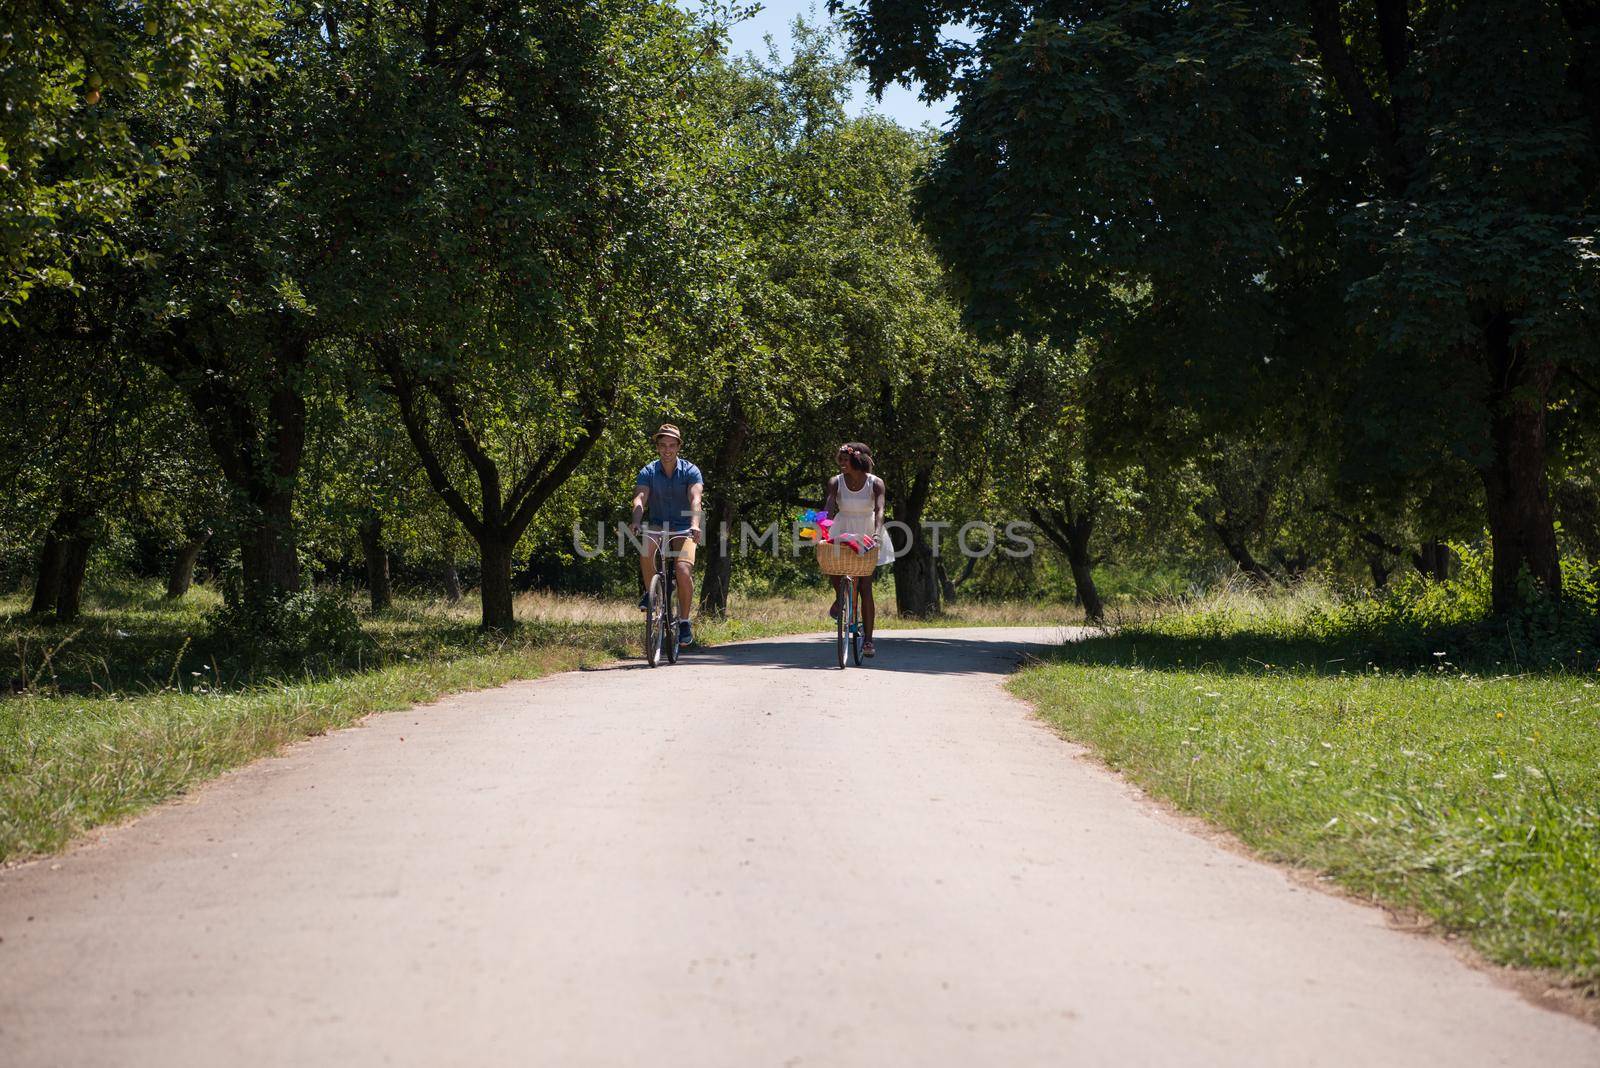 Young multiethnic couple having a bike ride in nature by dotshock